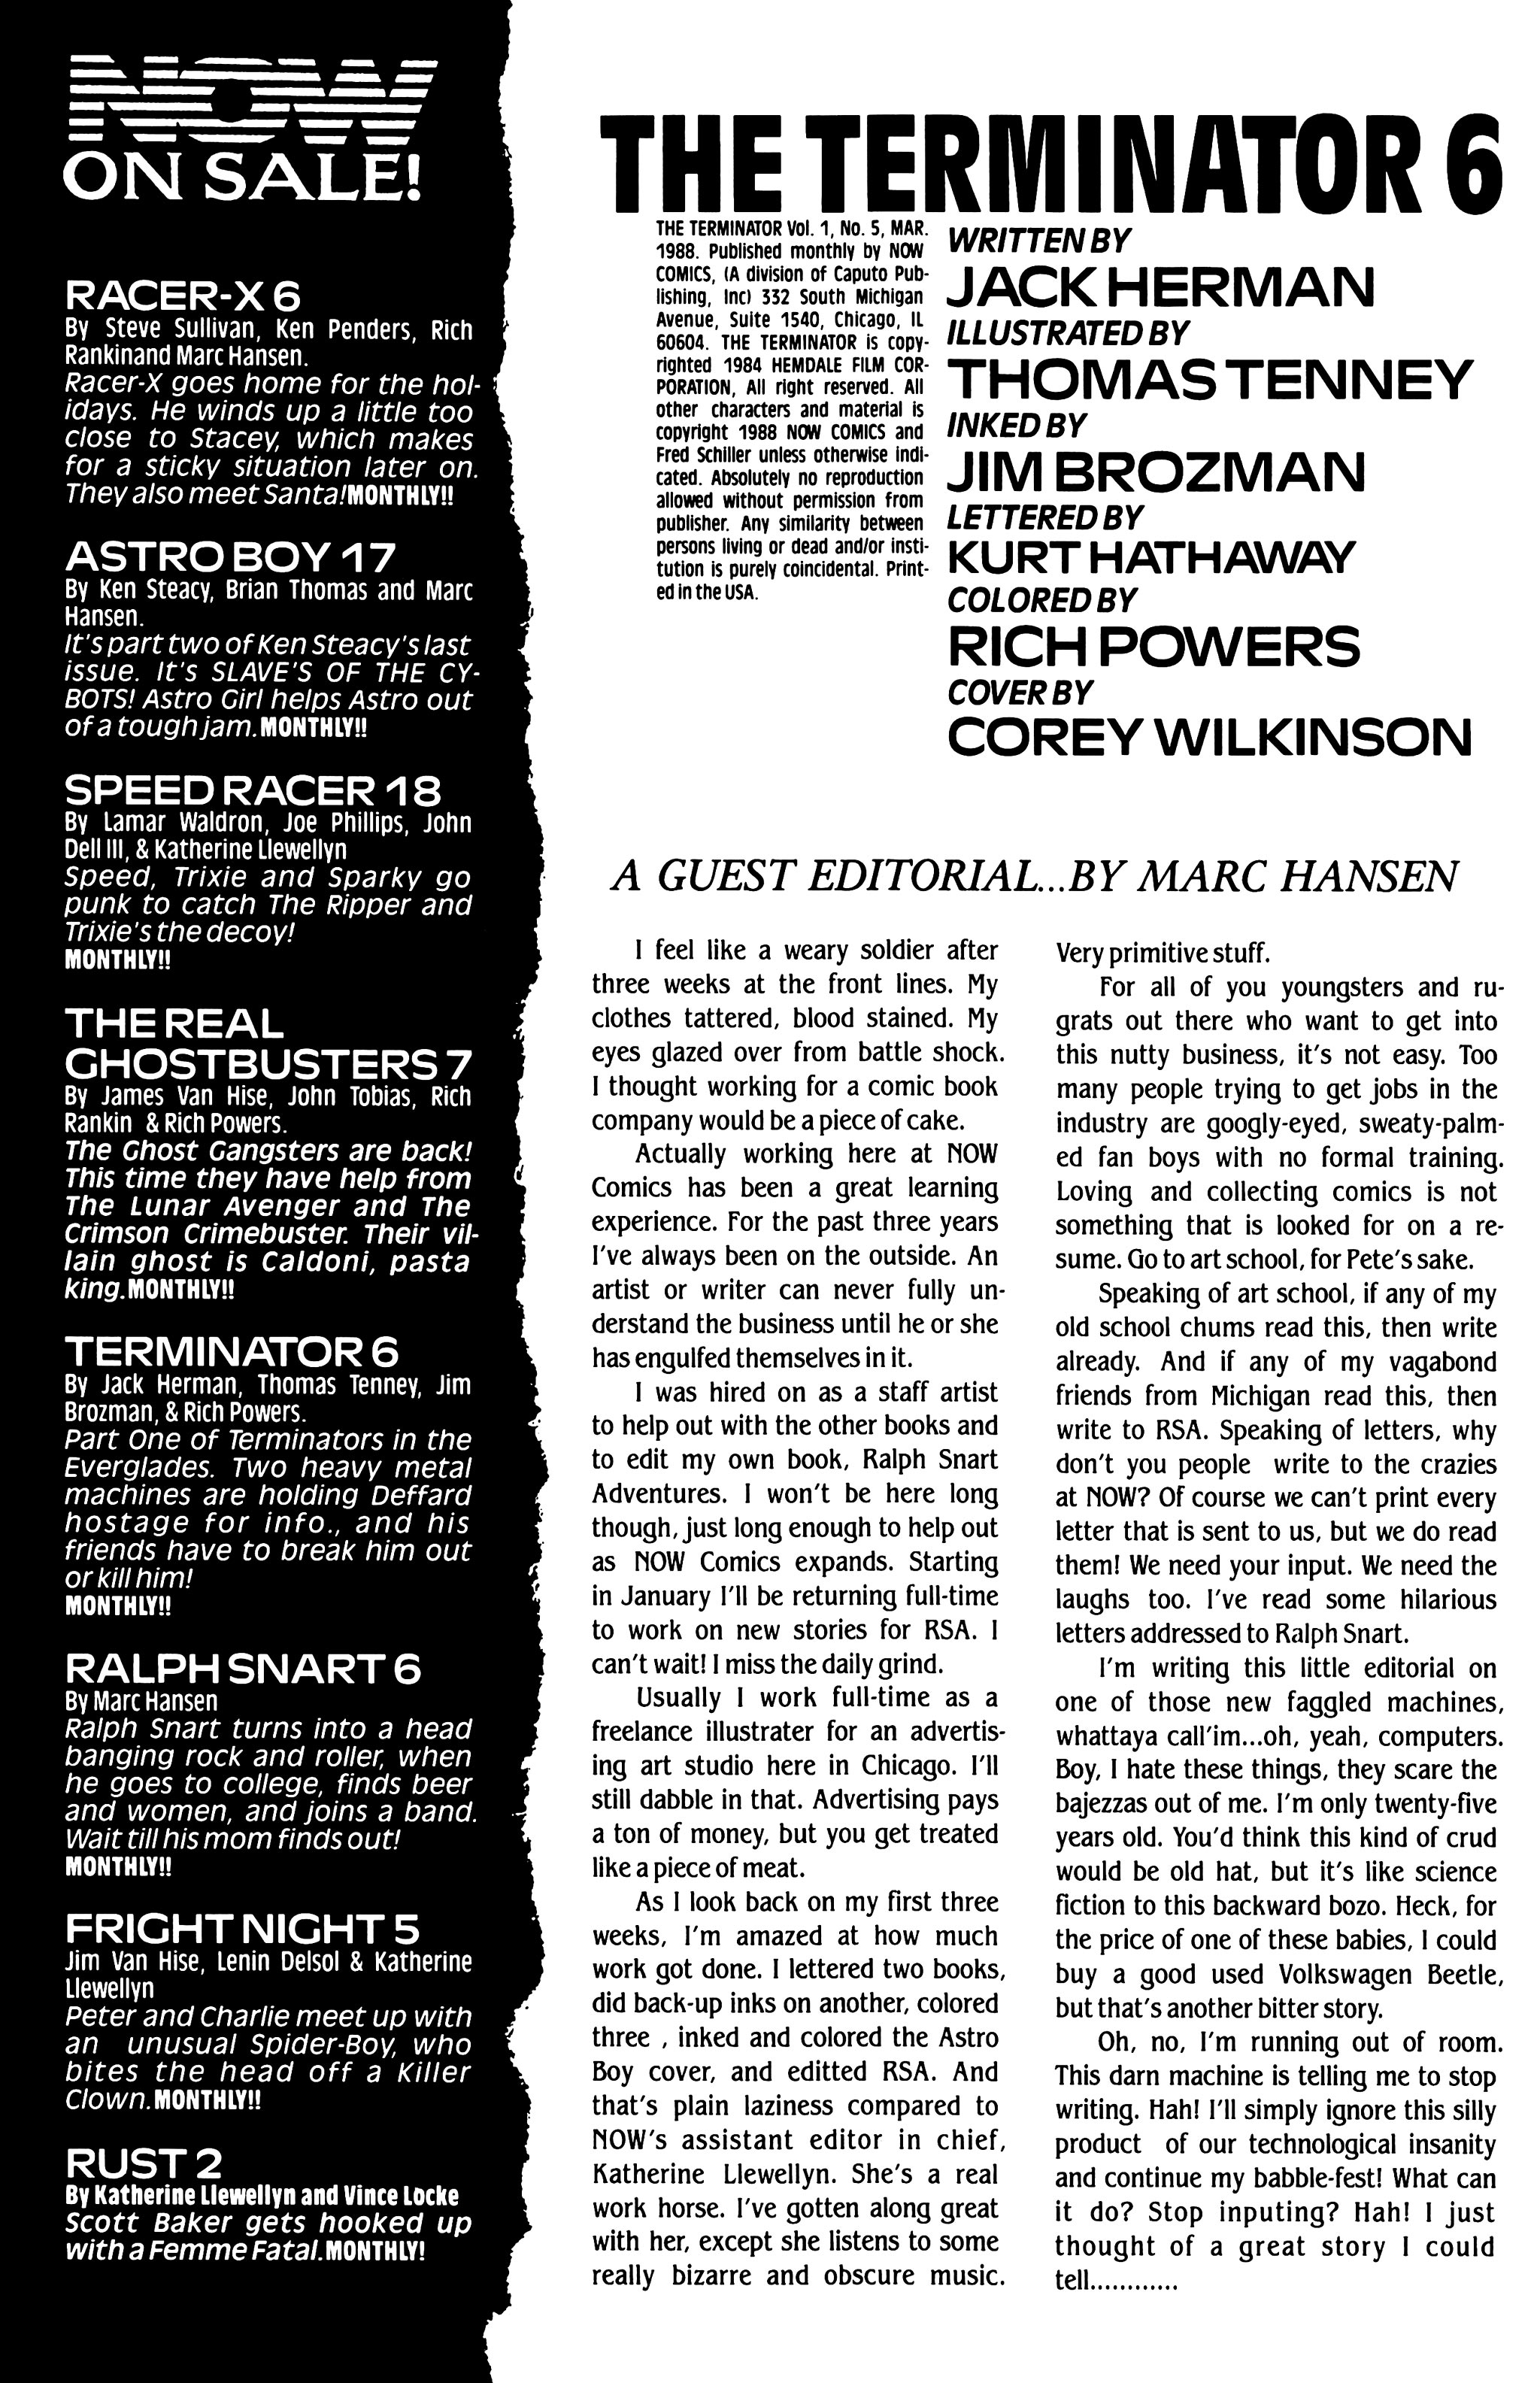 Read online The Terminator (1988) comic -  Issue #6 - 2